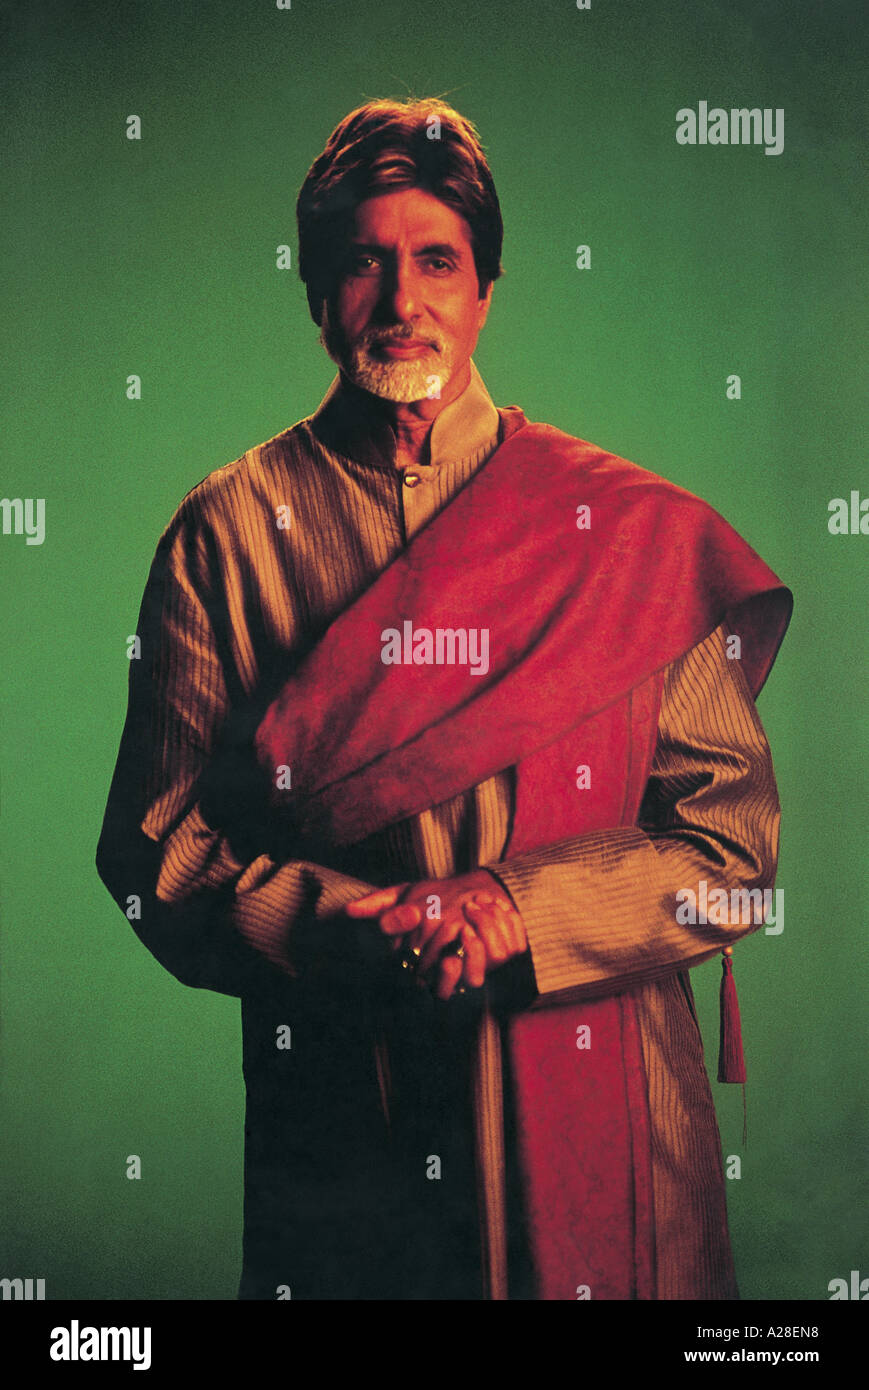 Amitabh Bachchan Indian Bollywood Hindi Movies Film Actor - For editorial use only - No Model Release - vca 76449 Stock Photo